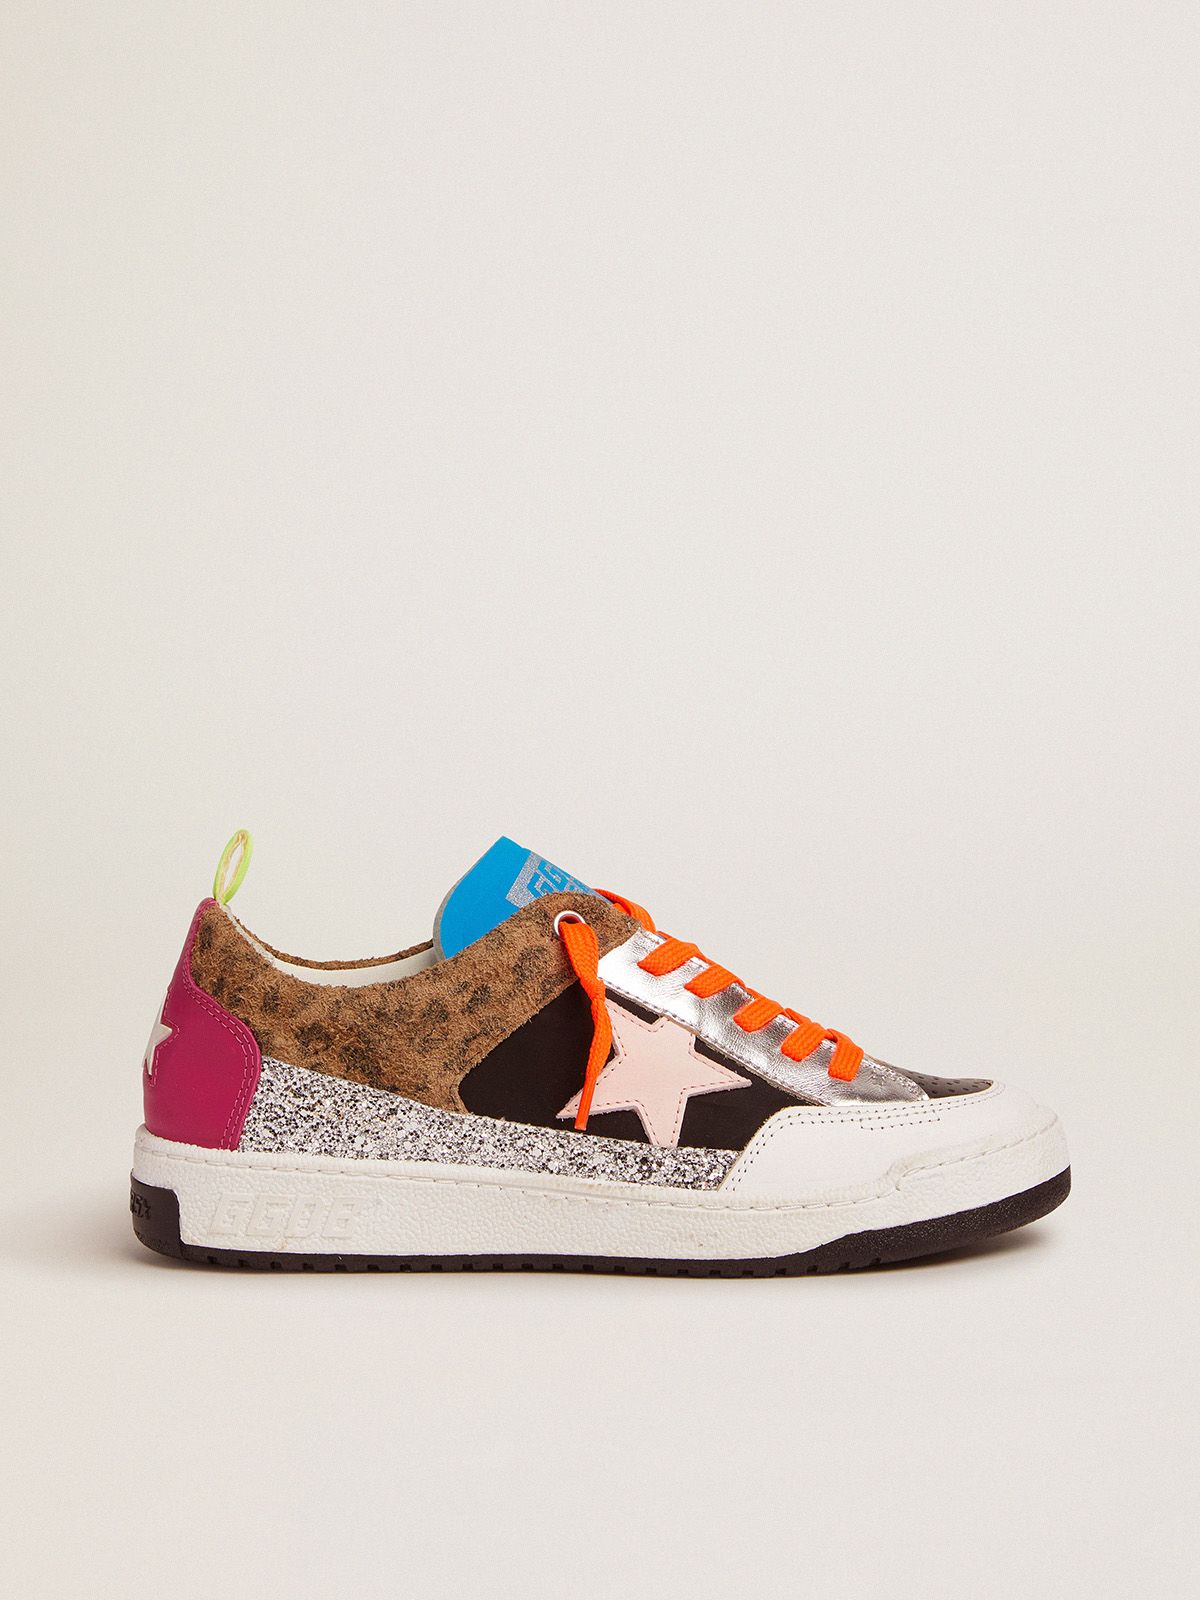 golden goose sneakers with patchwork silver glitter, colored Yeah and animal-print leather